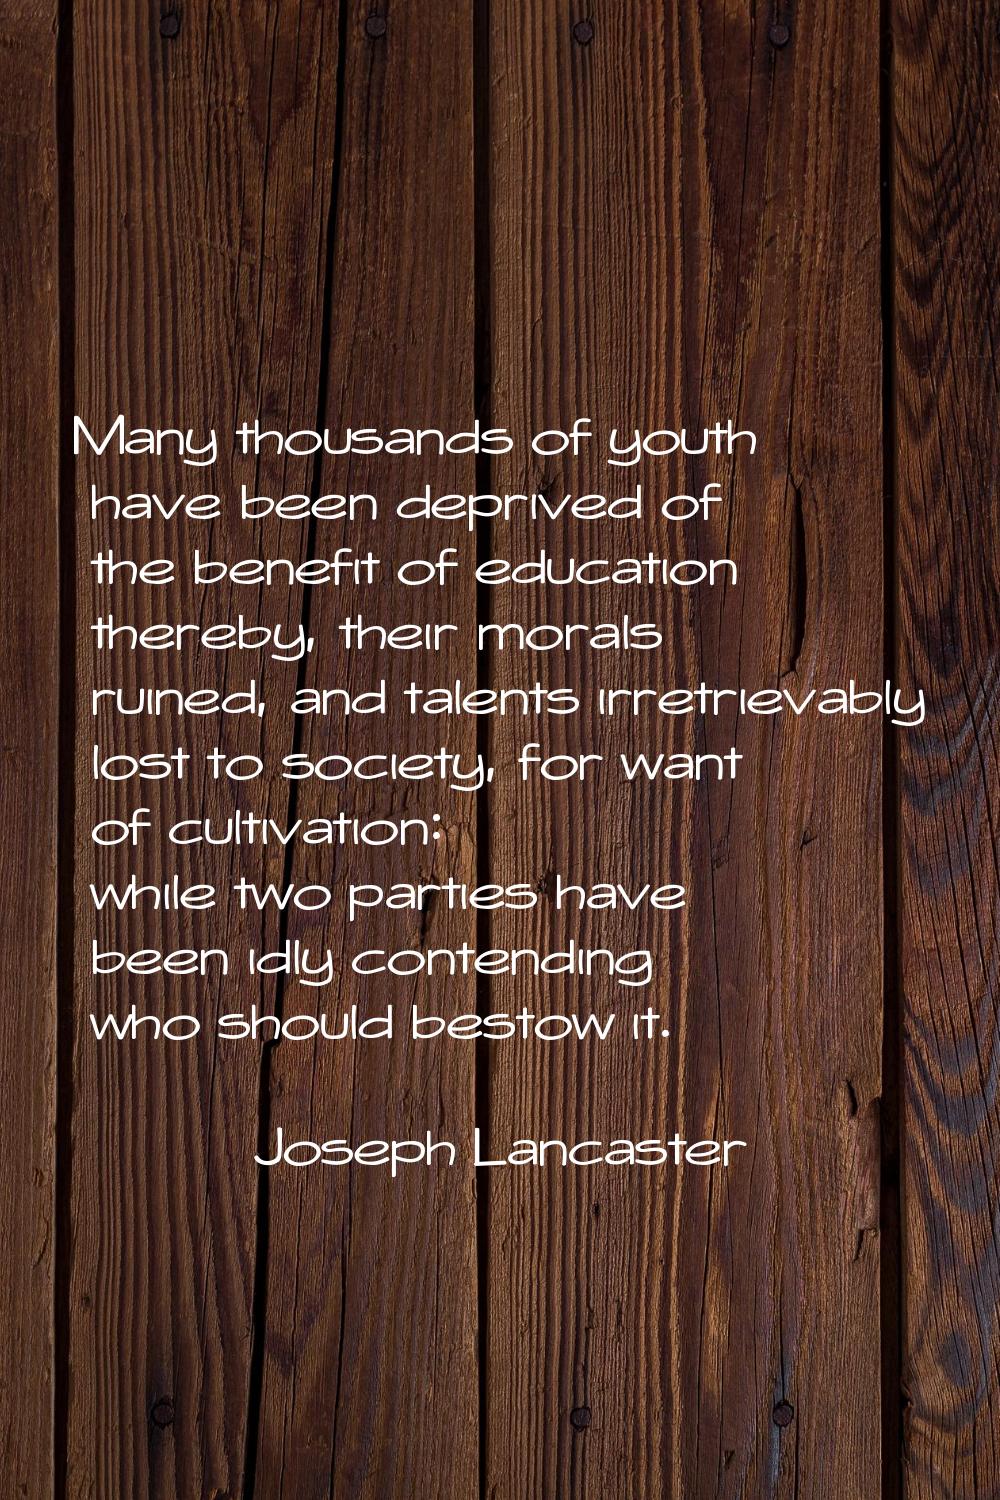 Many thousands of youth have been deprived of the benefit of education thereby, their morals ruined